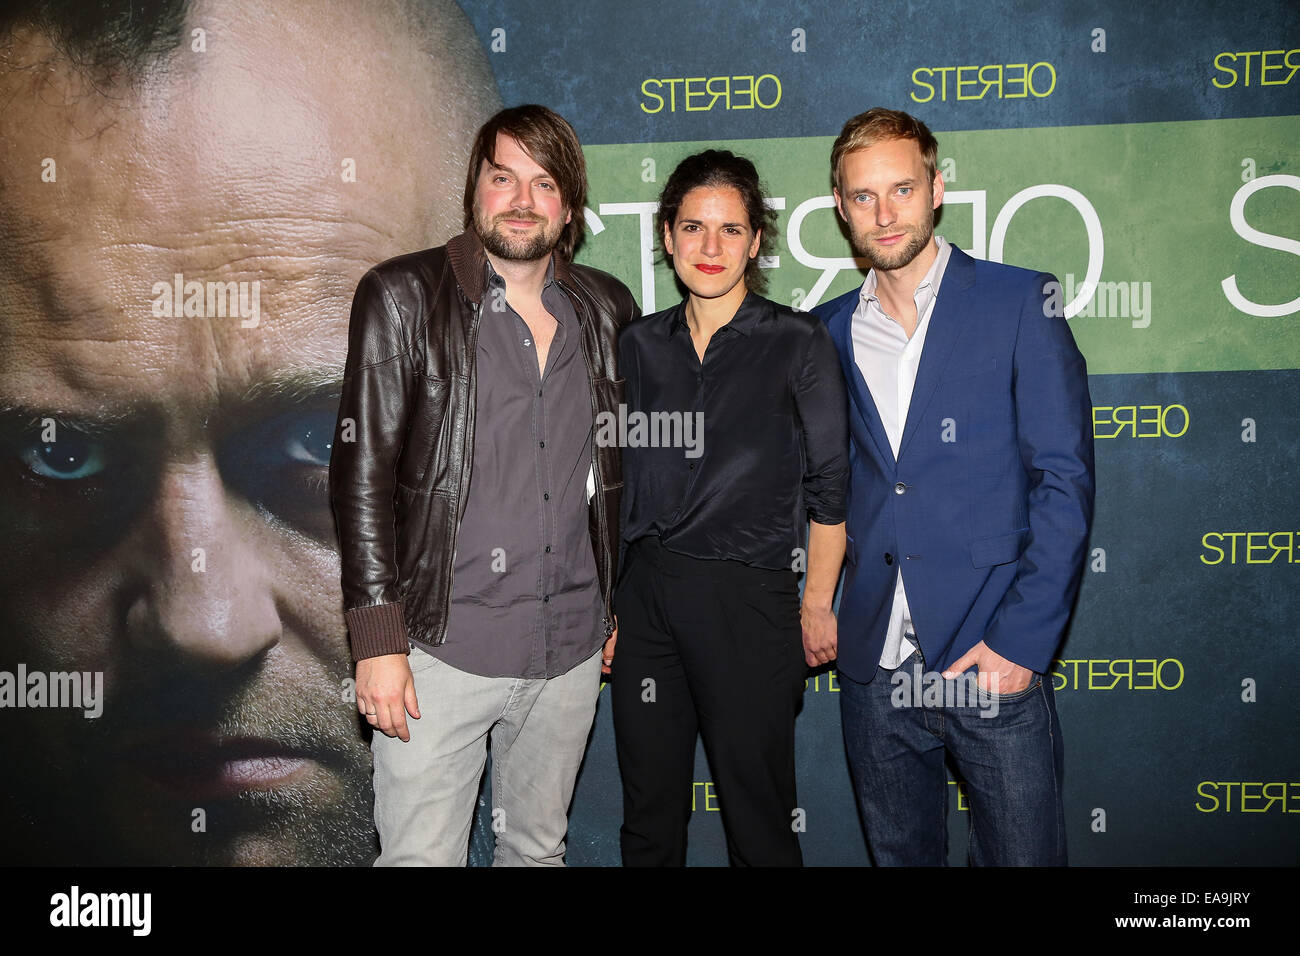 Premiere of the movie 'Stereo' at Cinema Muenchner Freiheit.  Featuring: Manuel Bickenbach,Amelie v. Kienlin,Maximilian Erlenwein Where: Munich, Germany When: 07 May 2014 Stock Photo